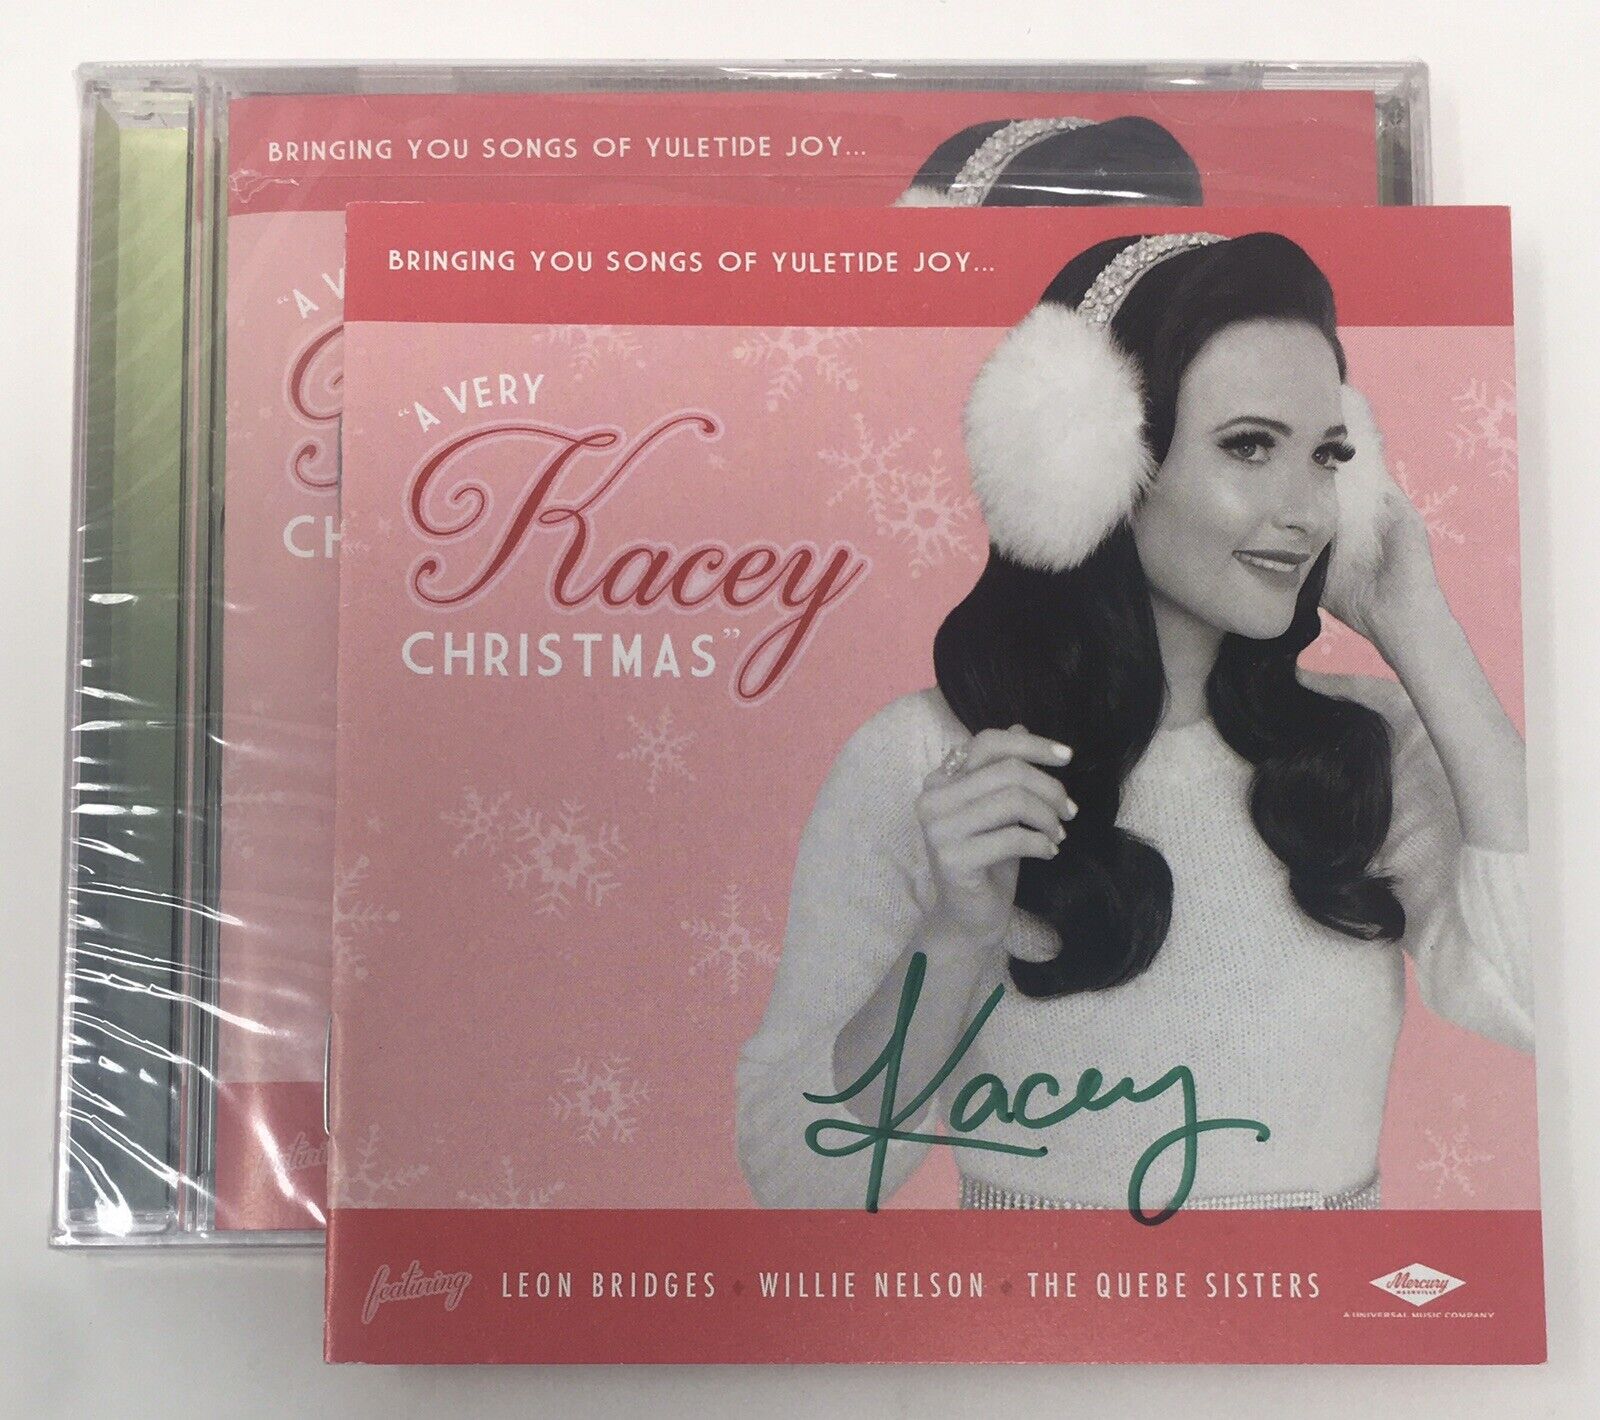 KACEY MUSGRAVES “A Very Kacey Christmas” SIGNED CD Autograph JSA COA Country